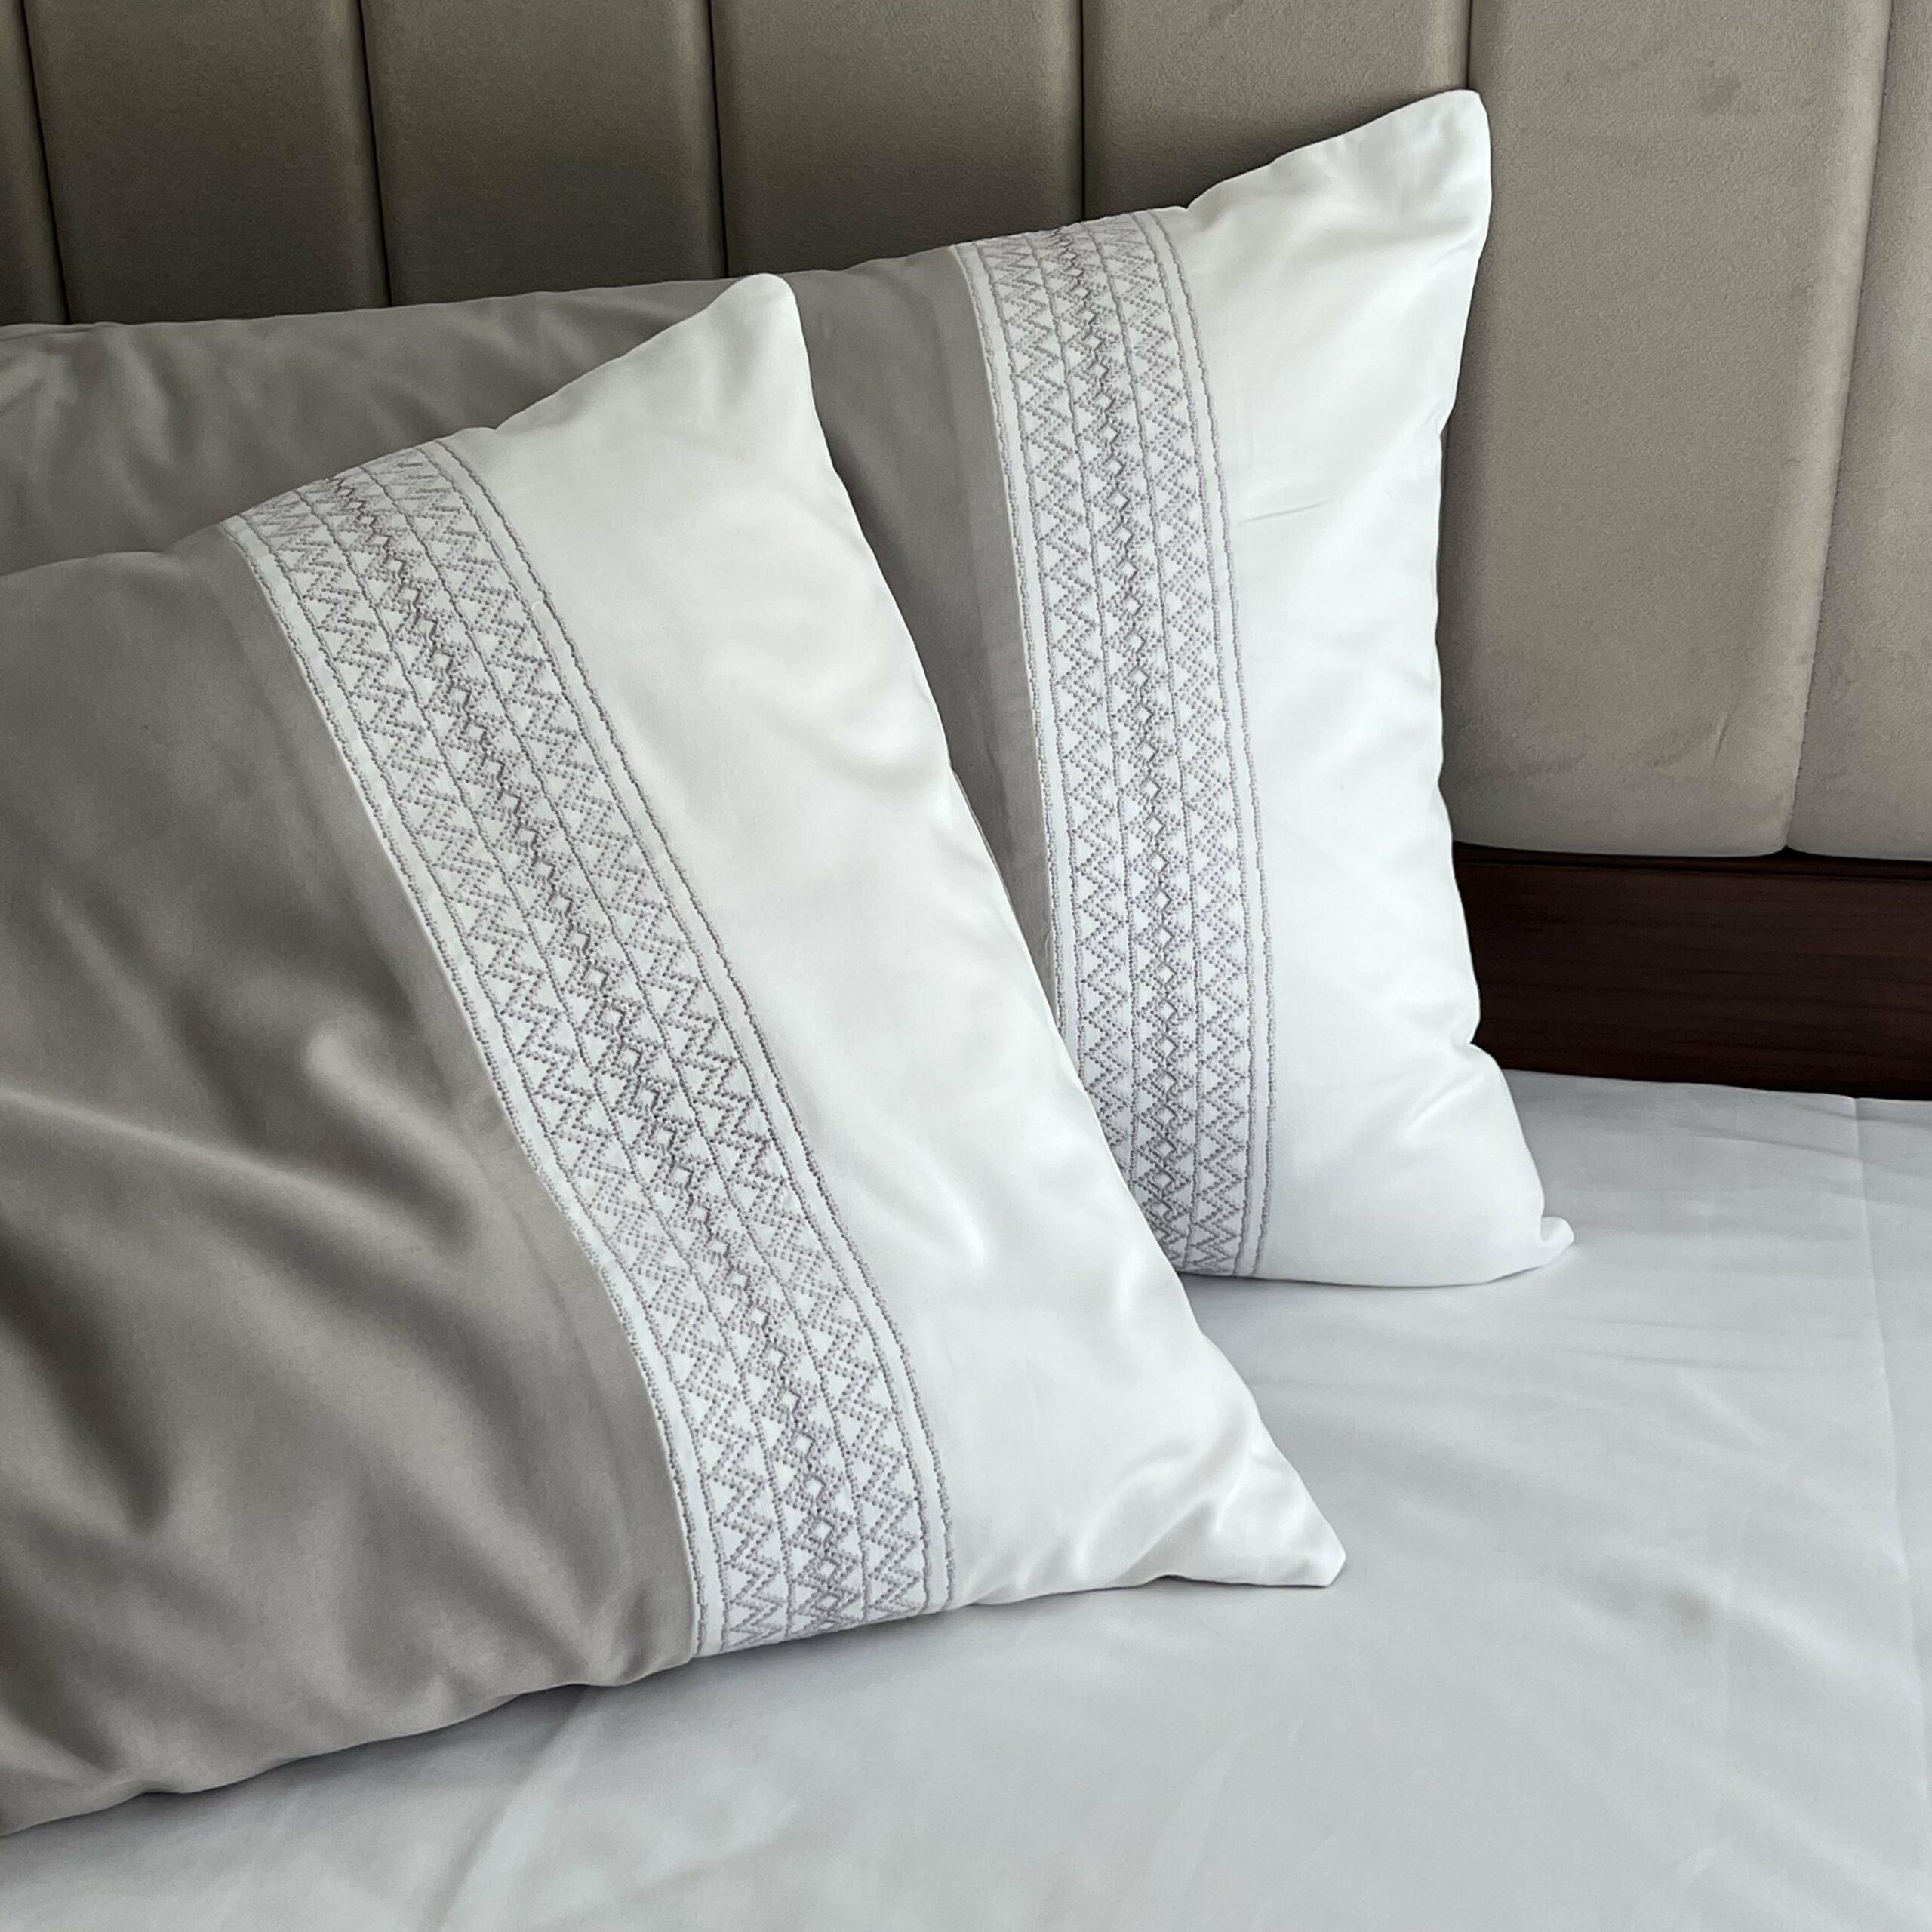 Lucent White Pillow Covers (Set of 2)